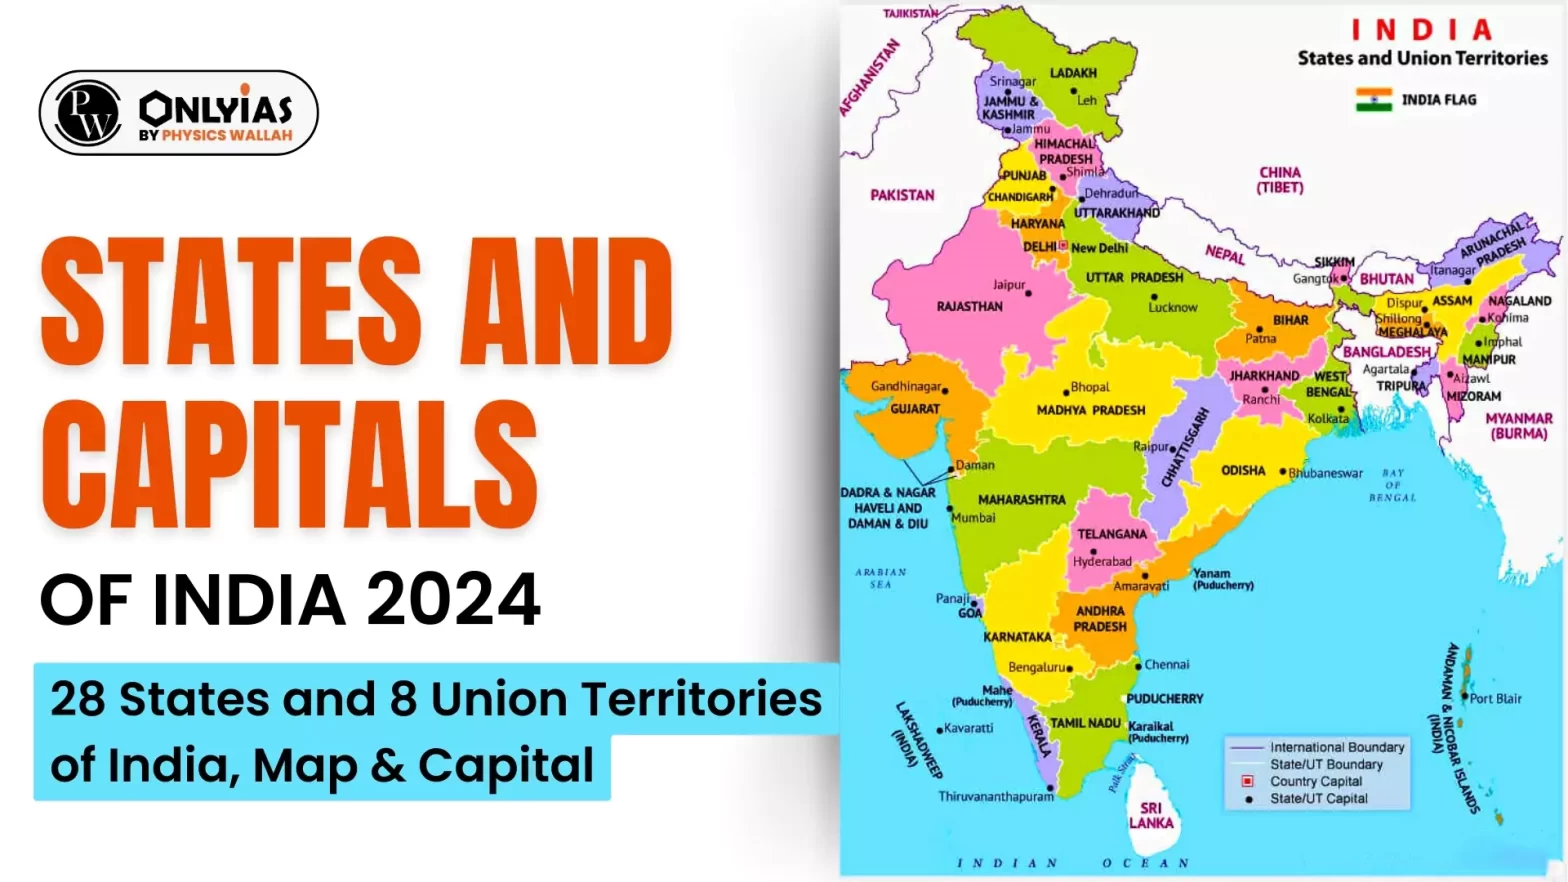 States and Capitals of India 2024, 28 States and 8 Union Territories of India, Map & Capital